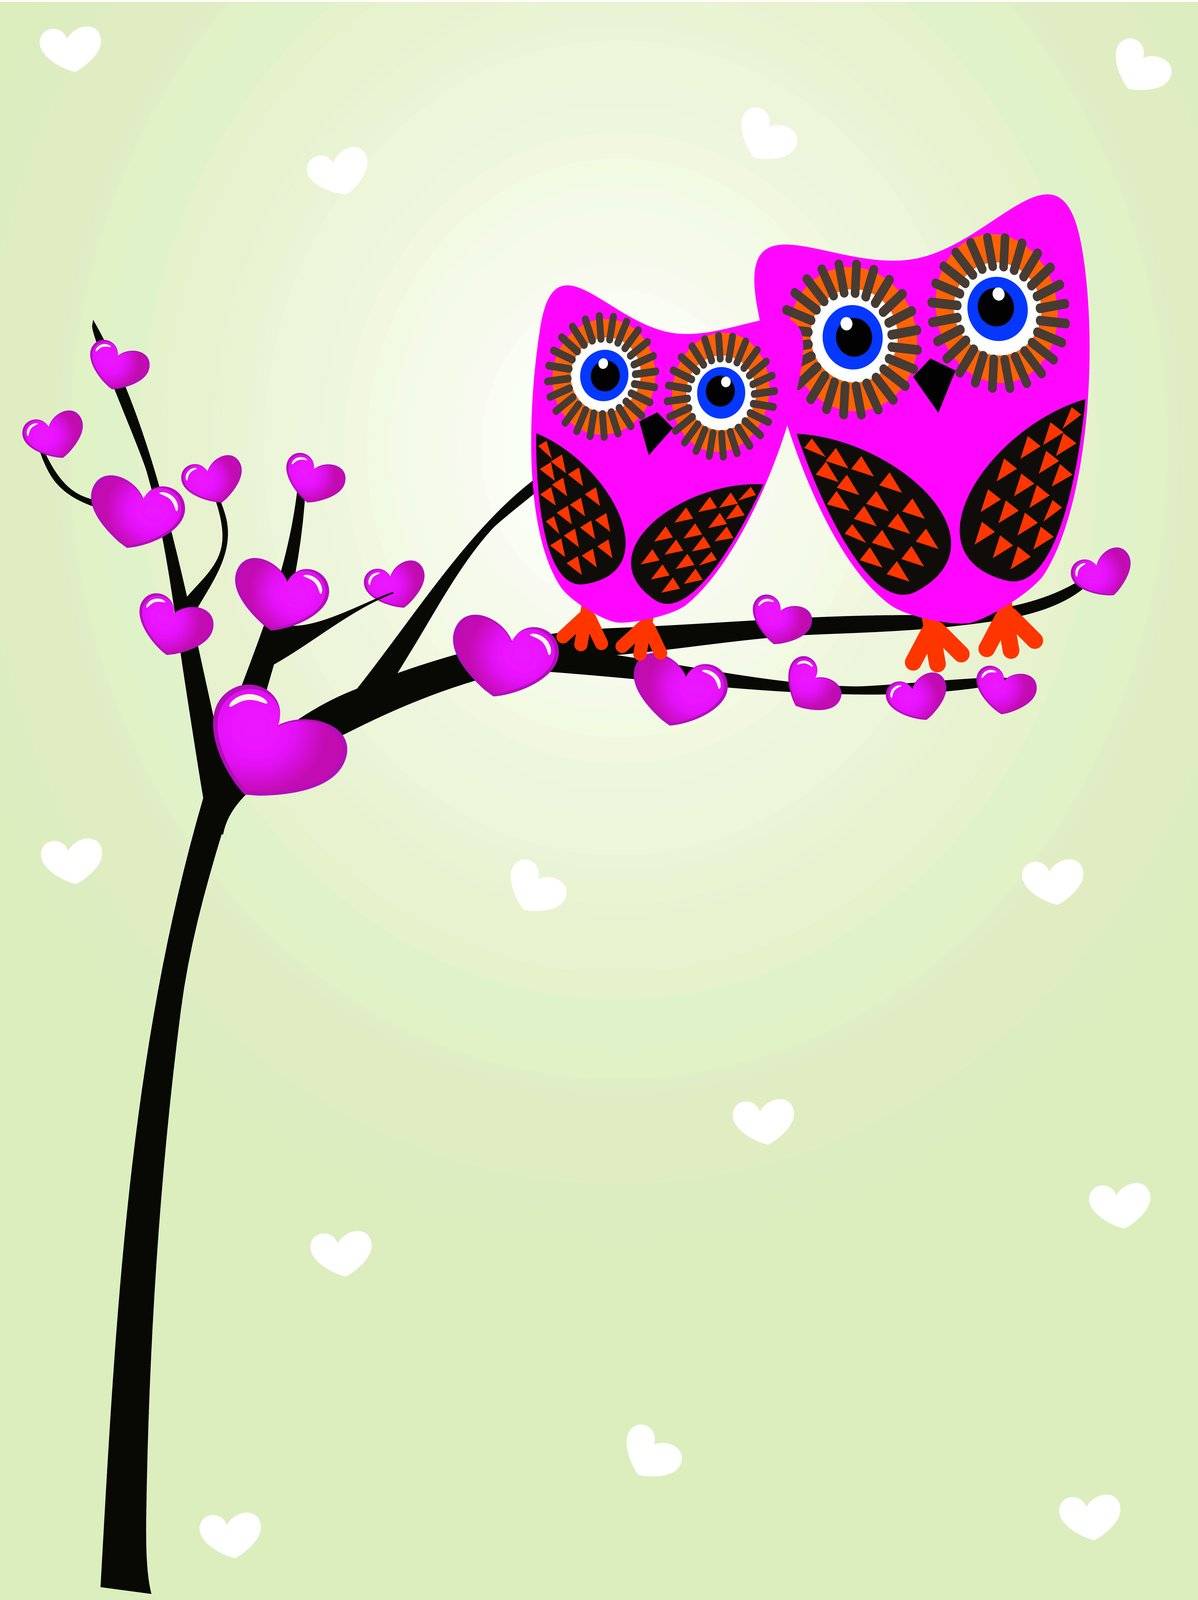 Two cute owls on the tree branch by mcherevan